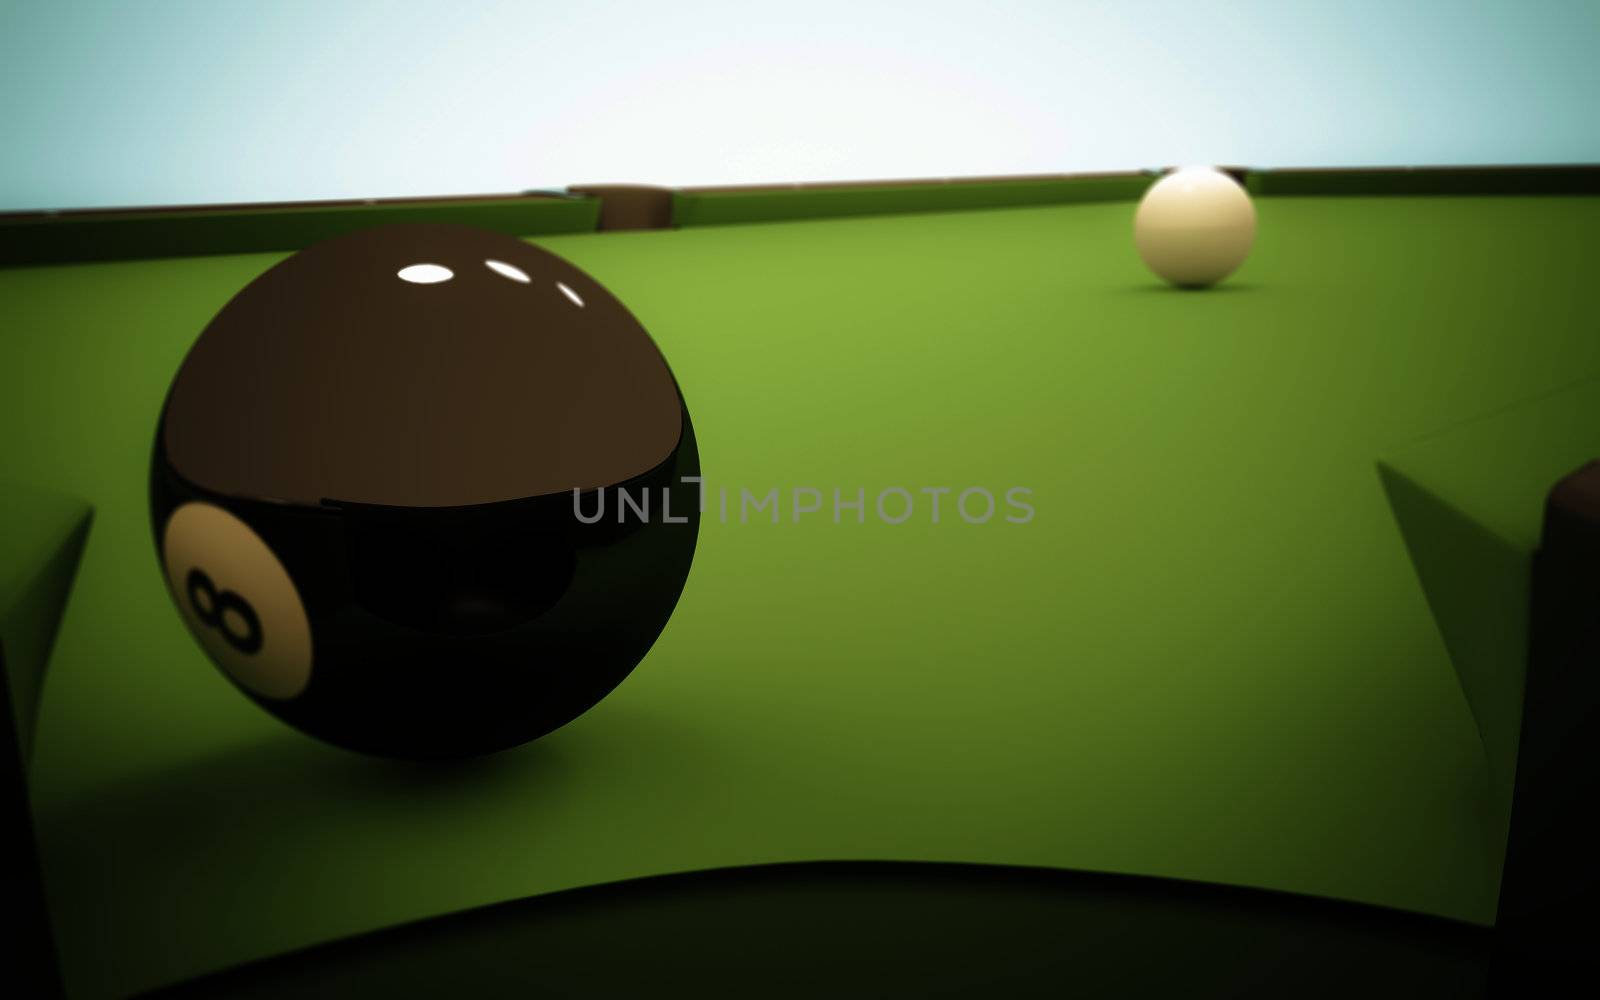 A white ball in the center of a pool table and the 8 ball near the corner pocket, viewed from within the pocket.